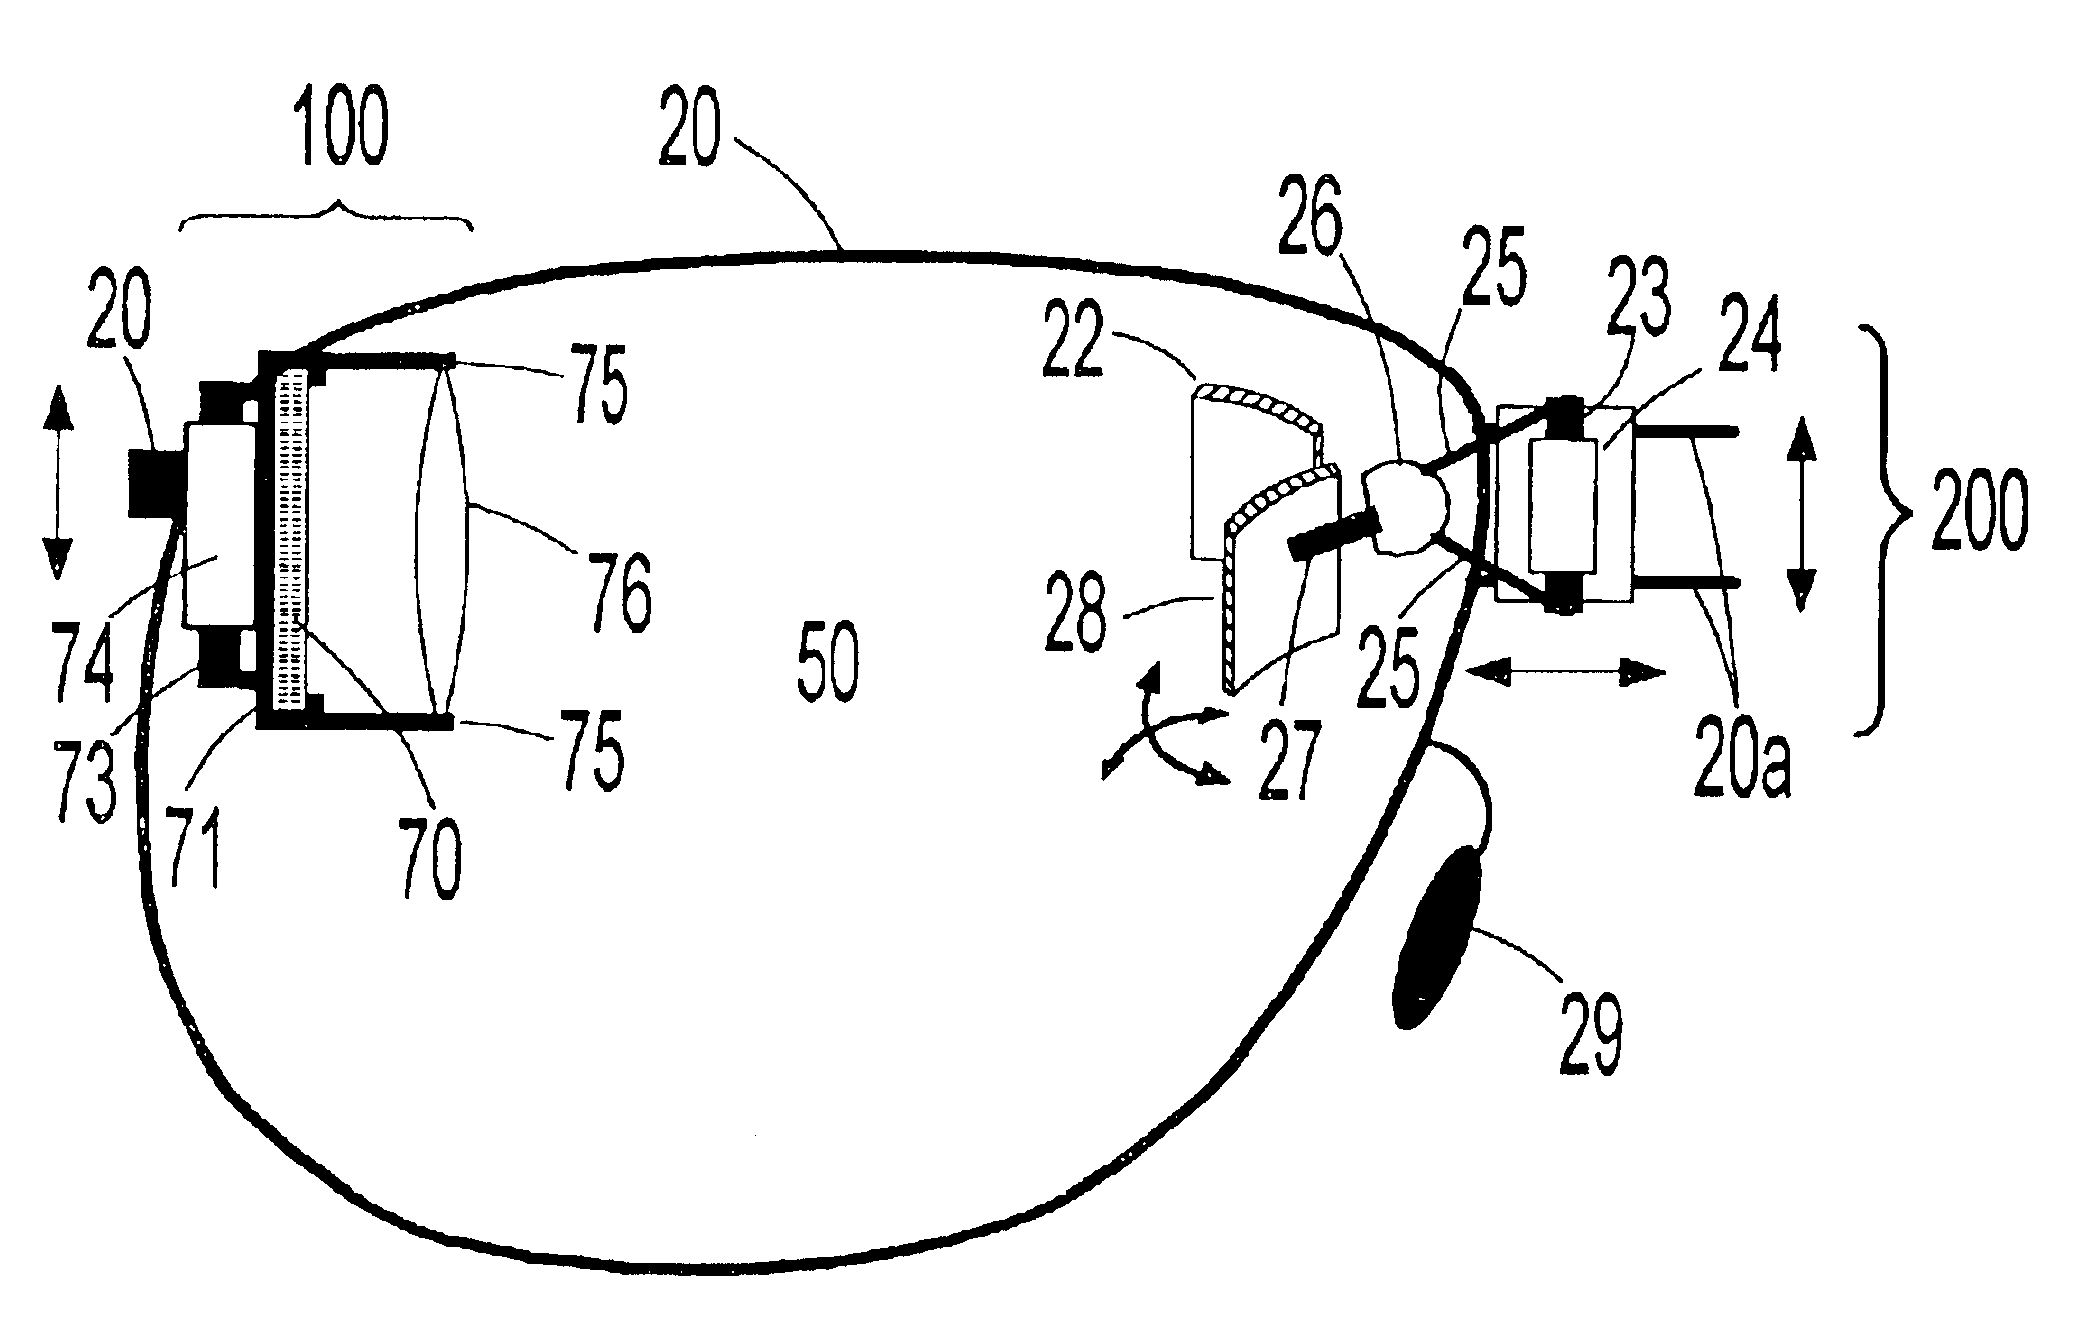 Head-mounted virtual display apparatus with a near-eye light deflecting element in the peripheral field of view